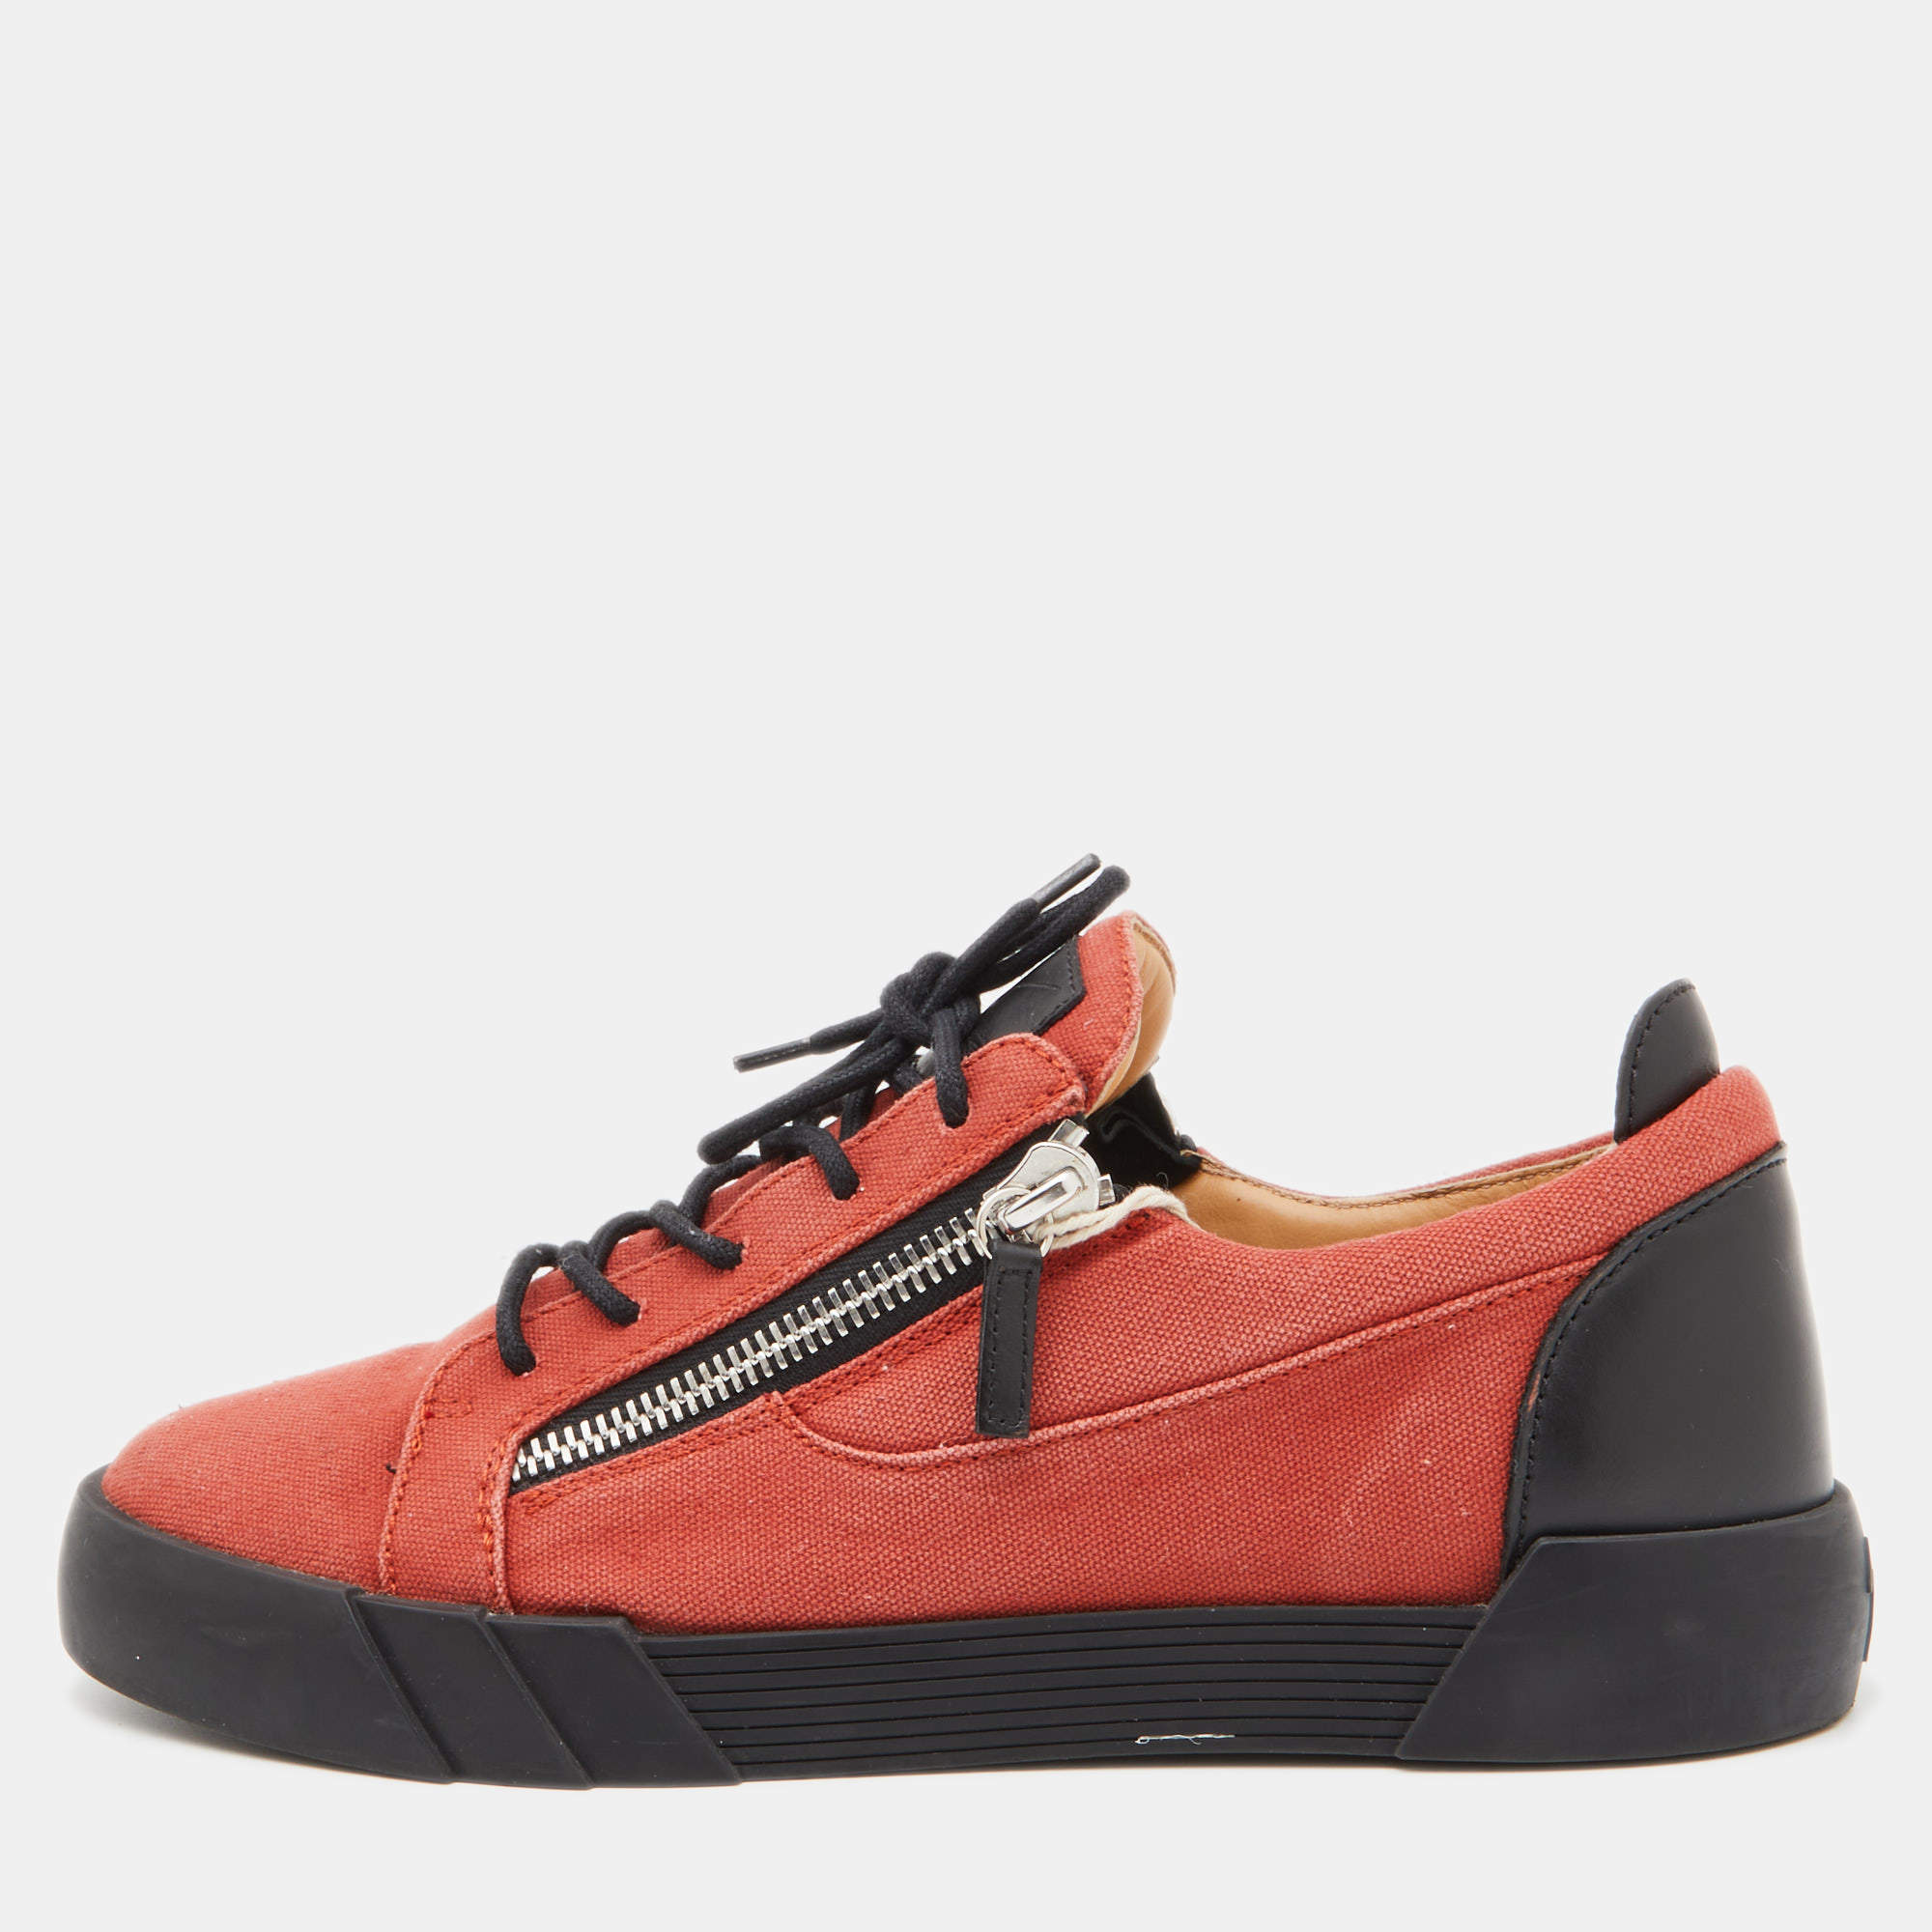 Gisueppe Zanotti Orange Canvas and Leather Double Zip Low Top Sneakers Size 43